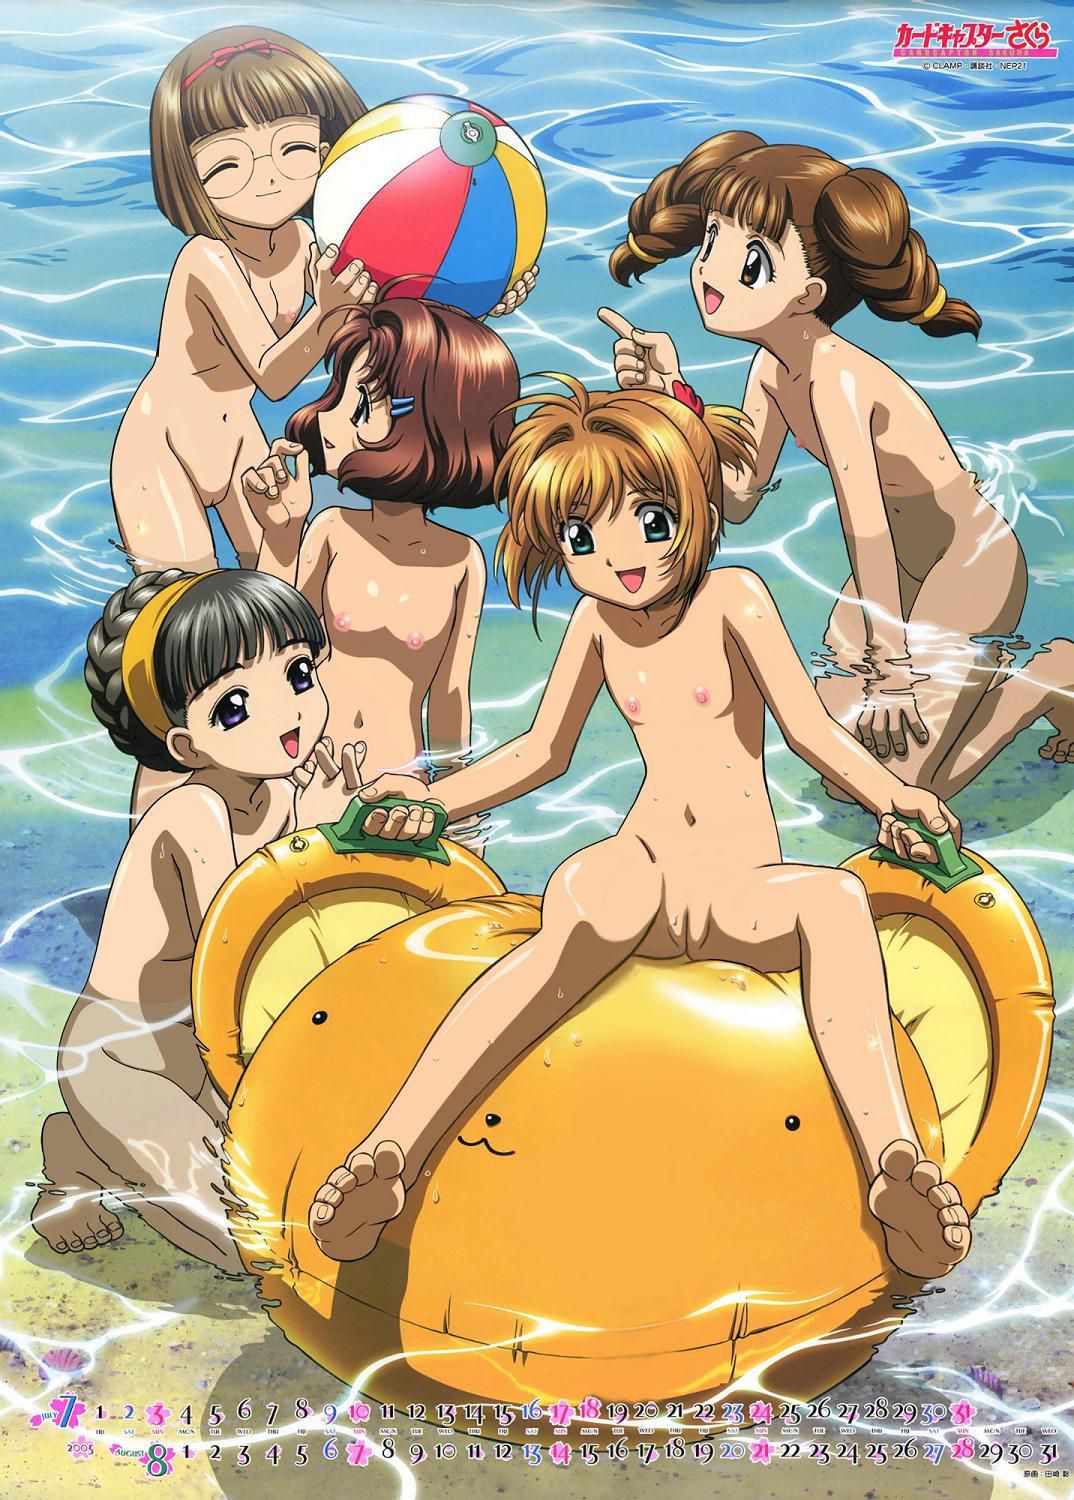 [Stripped Photoshop] anime pictures of the official picture, etc. Drop 84 images of the nostalgic anime feature 30